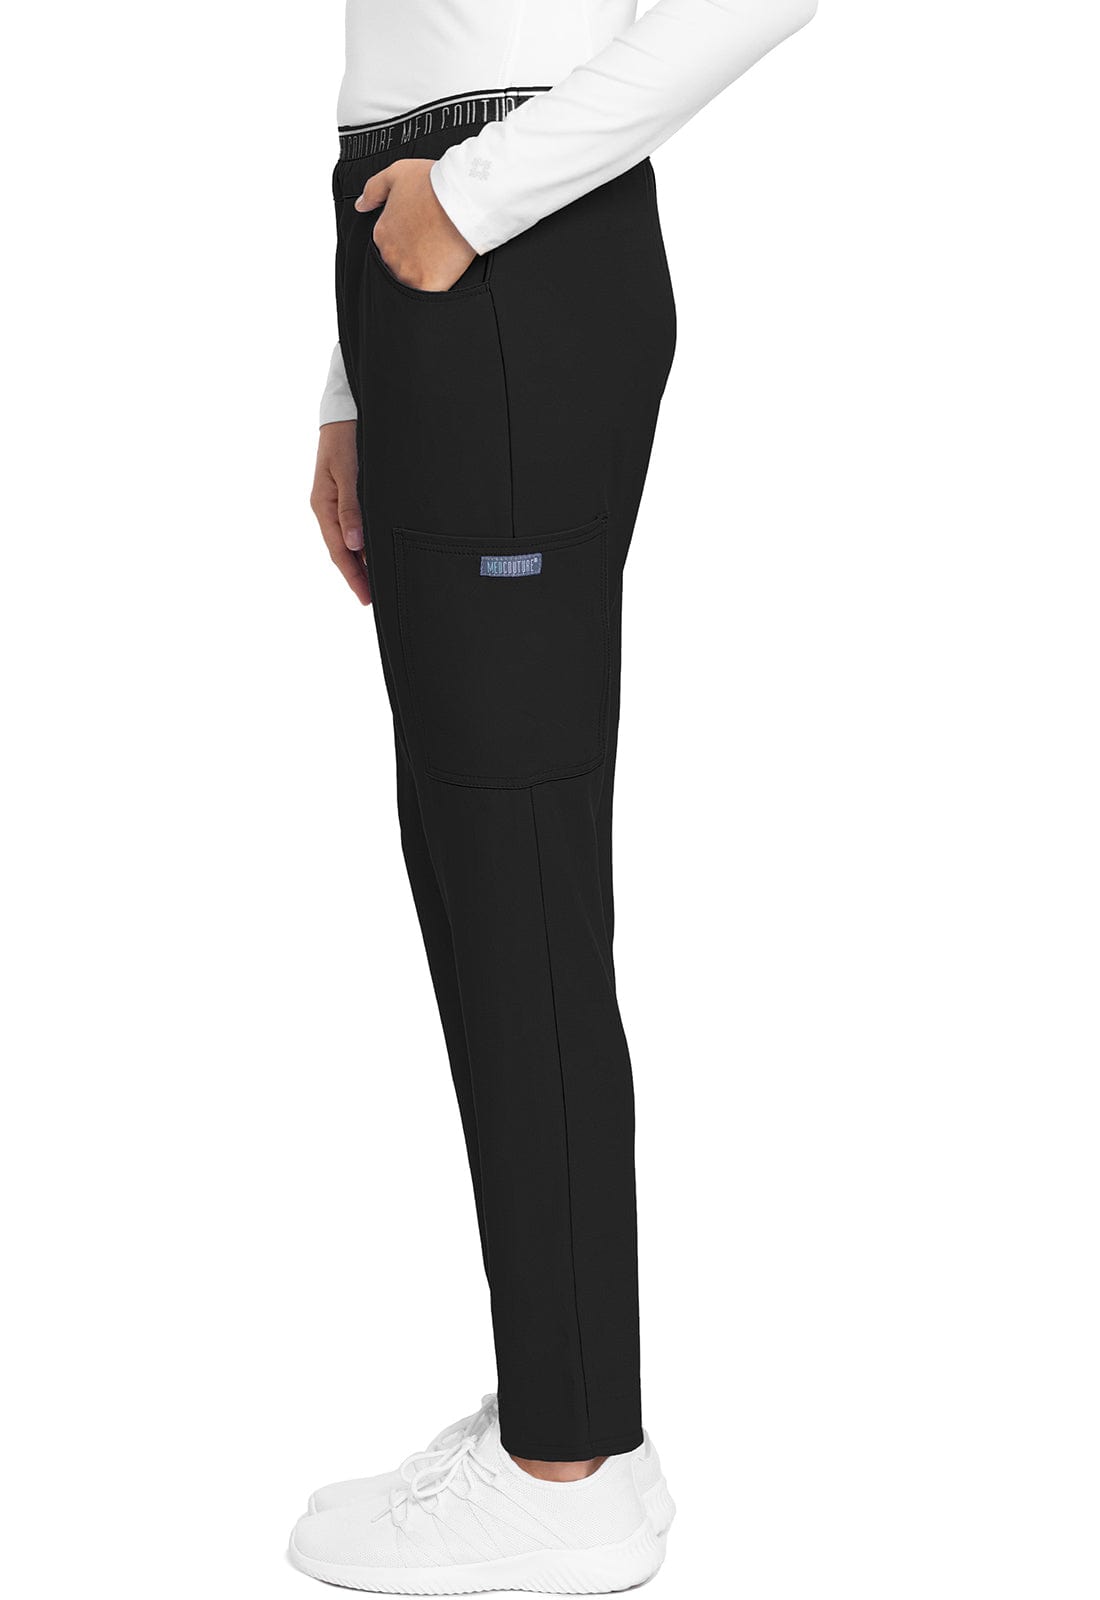 Med Couture MC Insight MC Insight Tall Mid-rise Tapered Leg Pull-on Beauty Pant MC009T